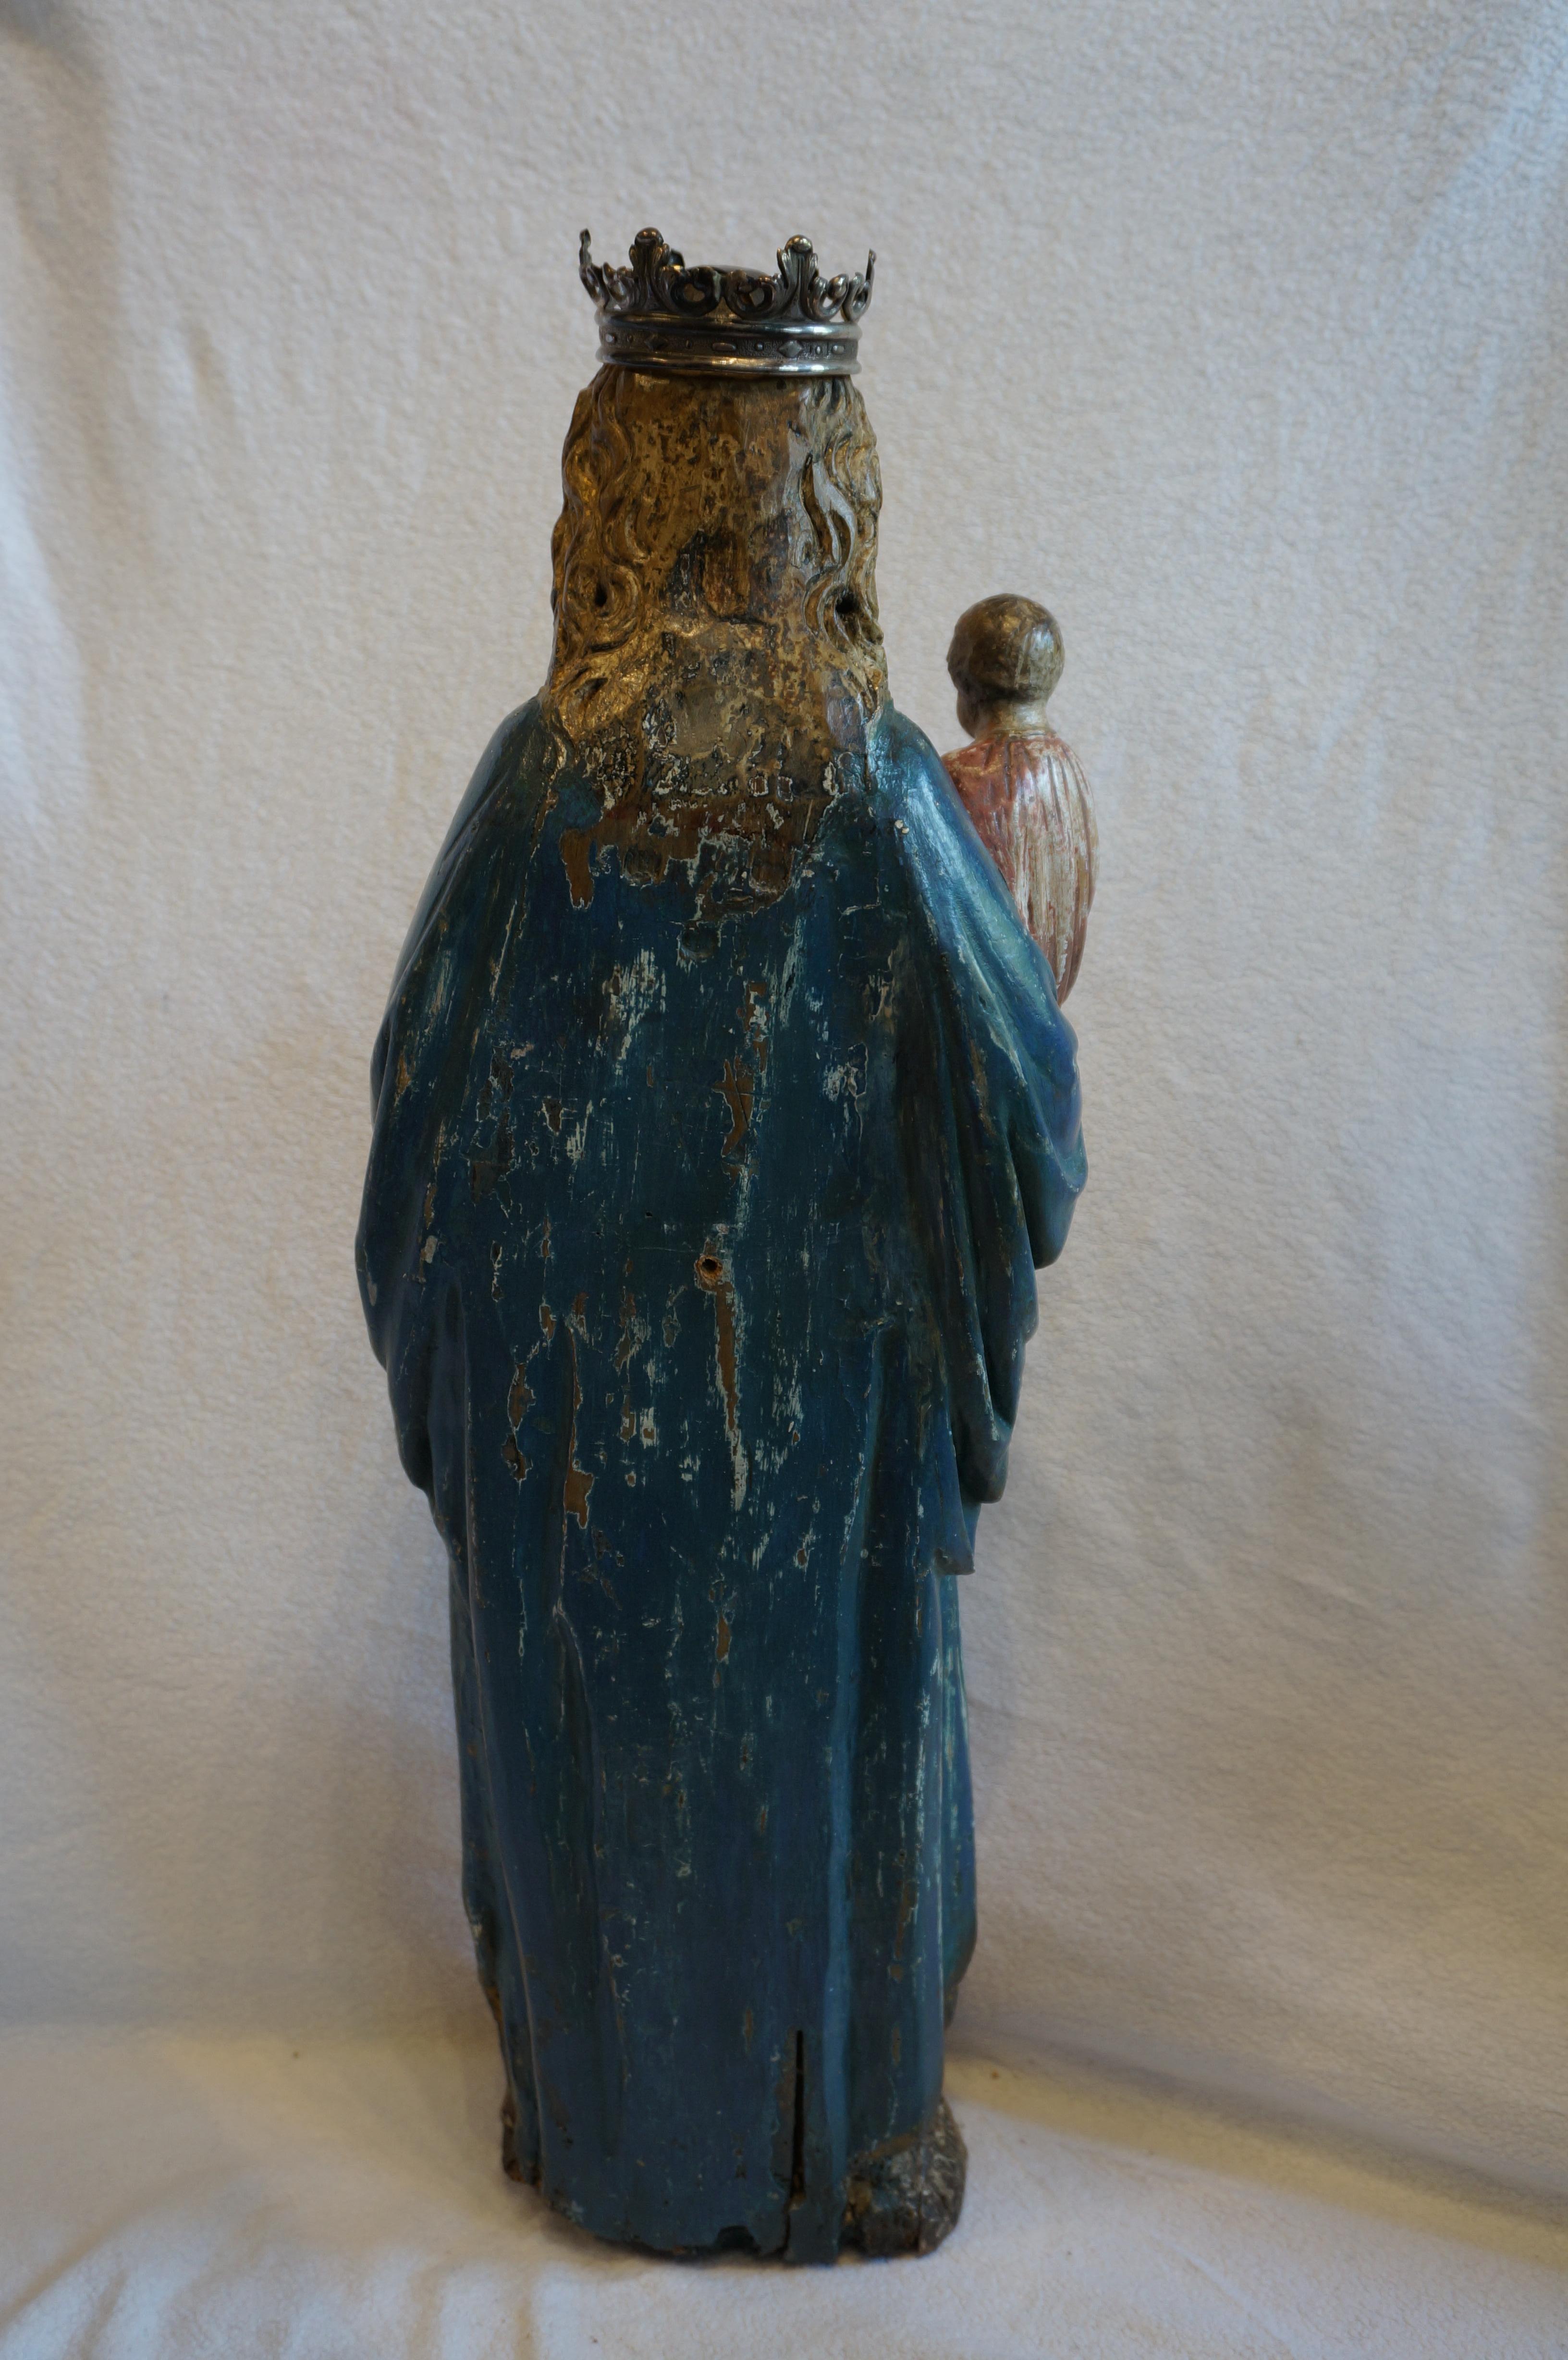 Antique Sculpture of Mary with the Child Jesus, Belgium, early 17th century For Sale 9